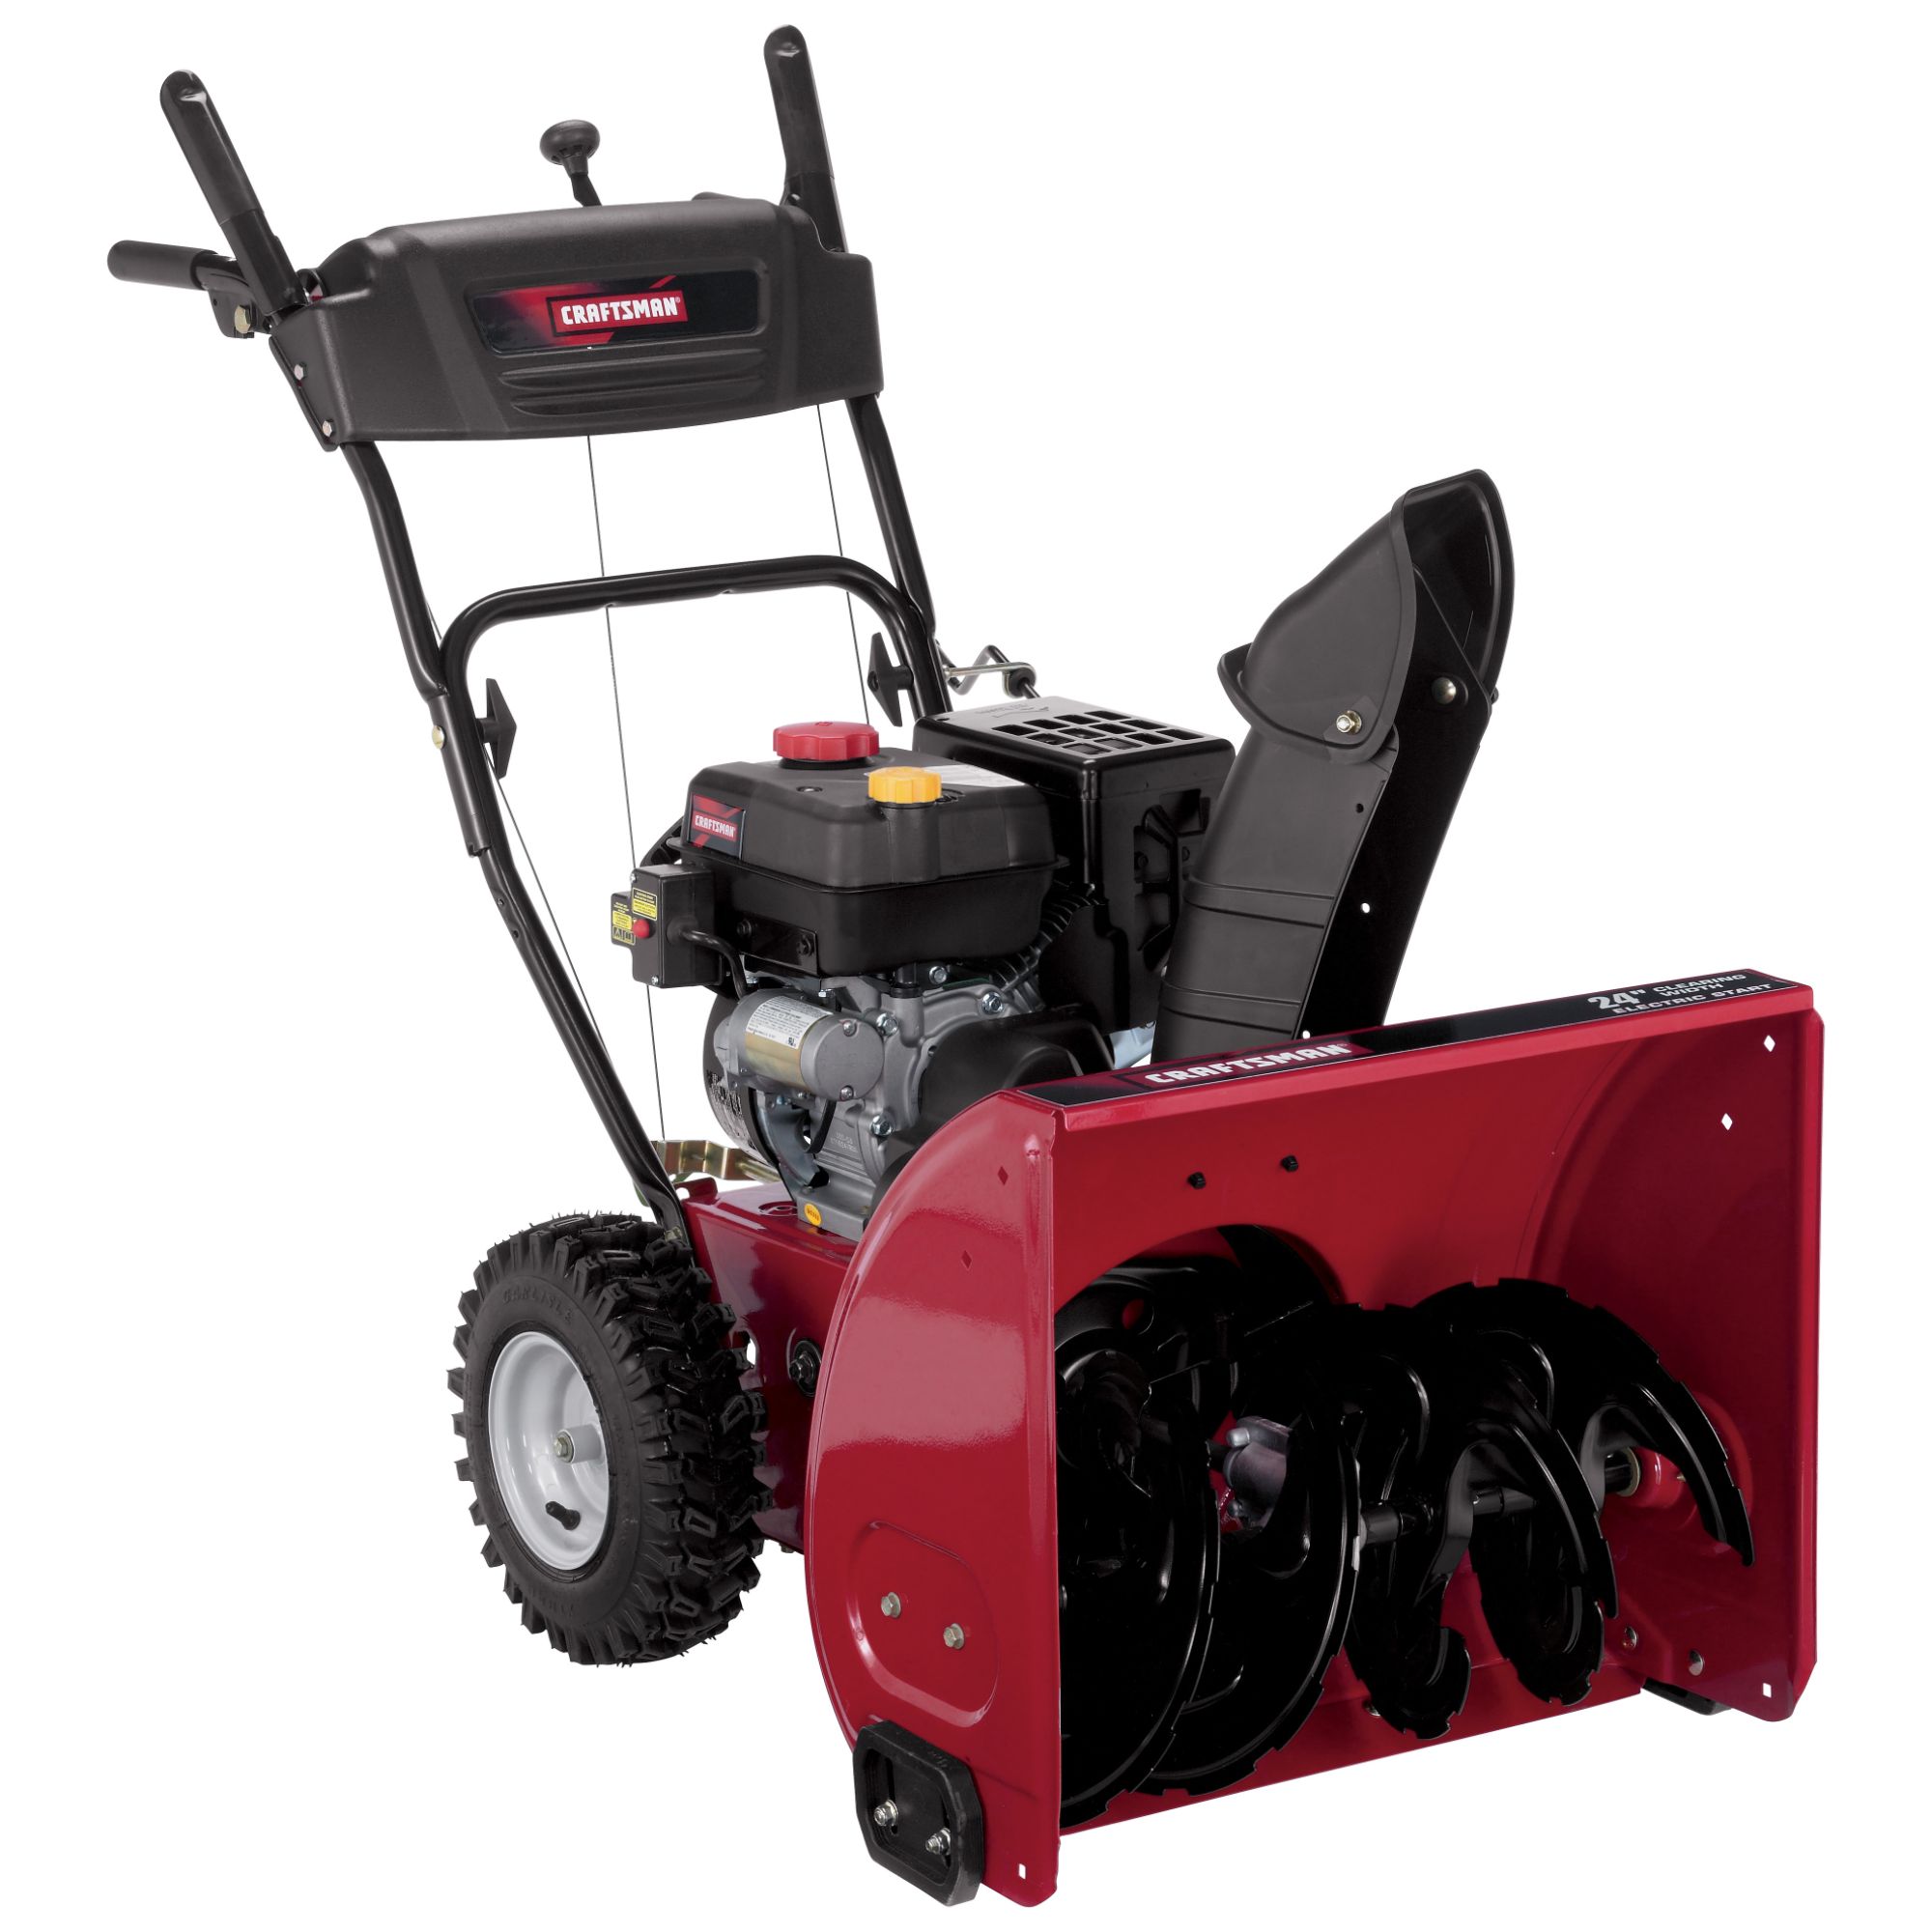 Craftsman 179cc 24" path Two stage Snowblower - MTD PRODUCTS INC.